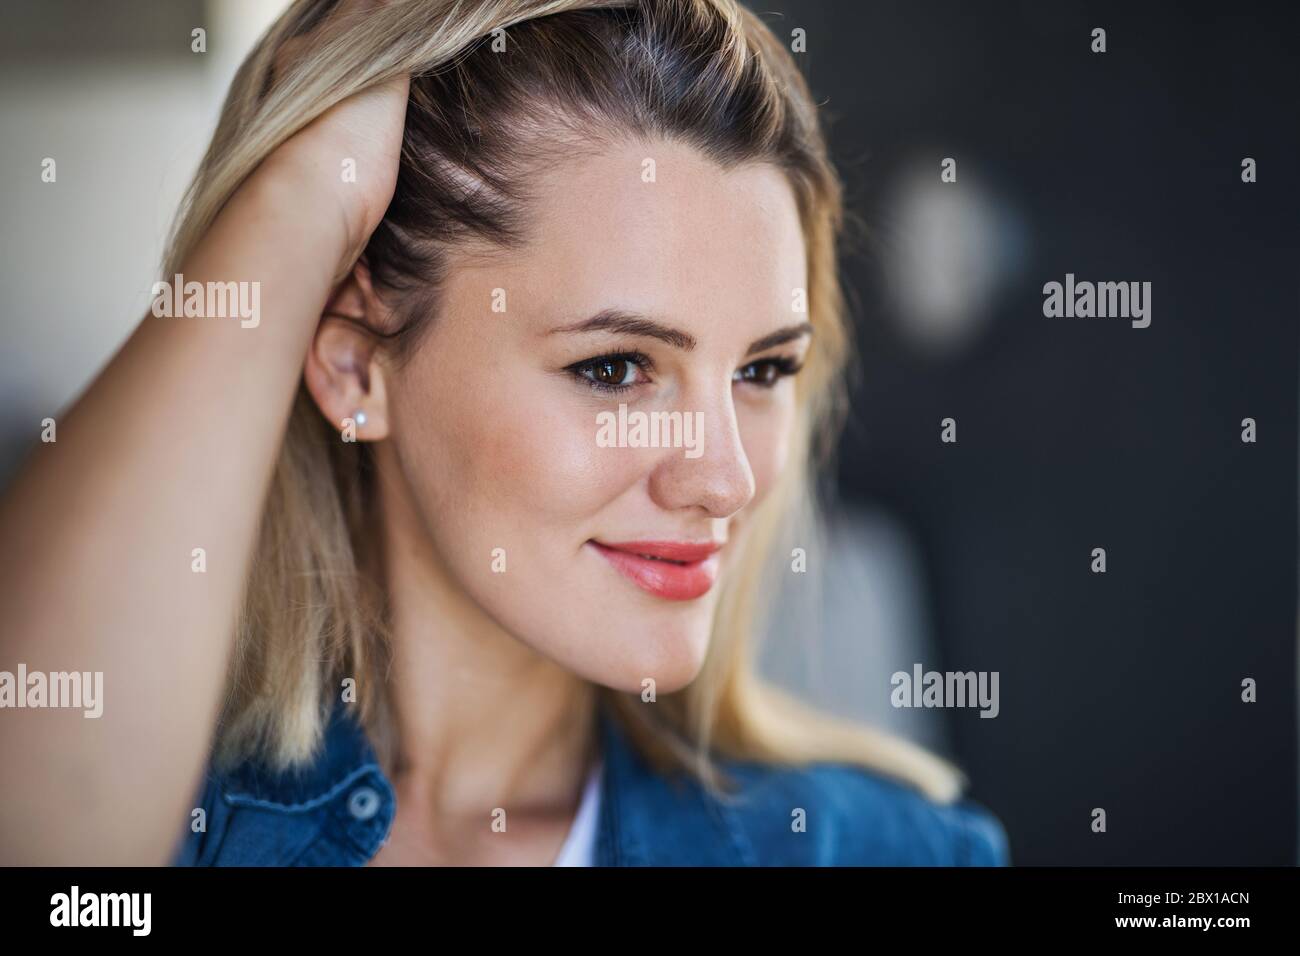 Close-up portrait of happy young woman indoors at home. Stock Photo